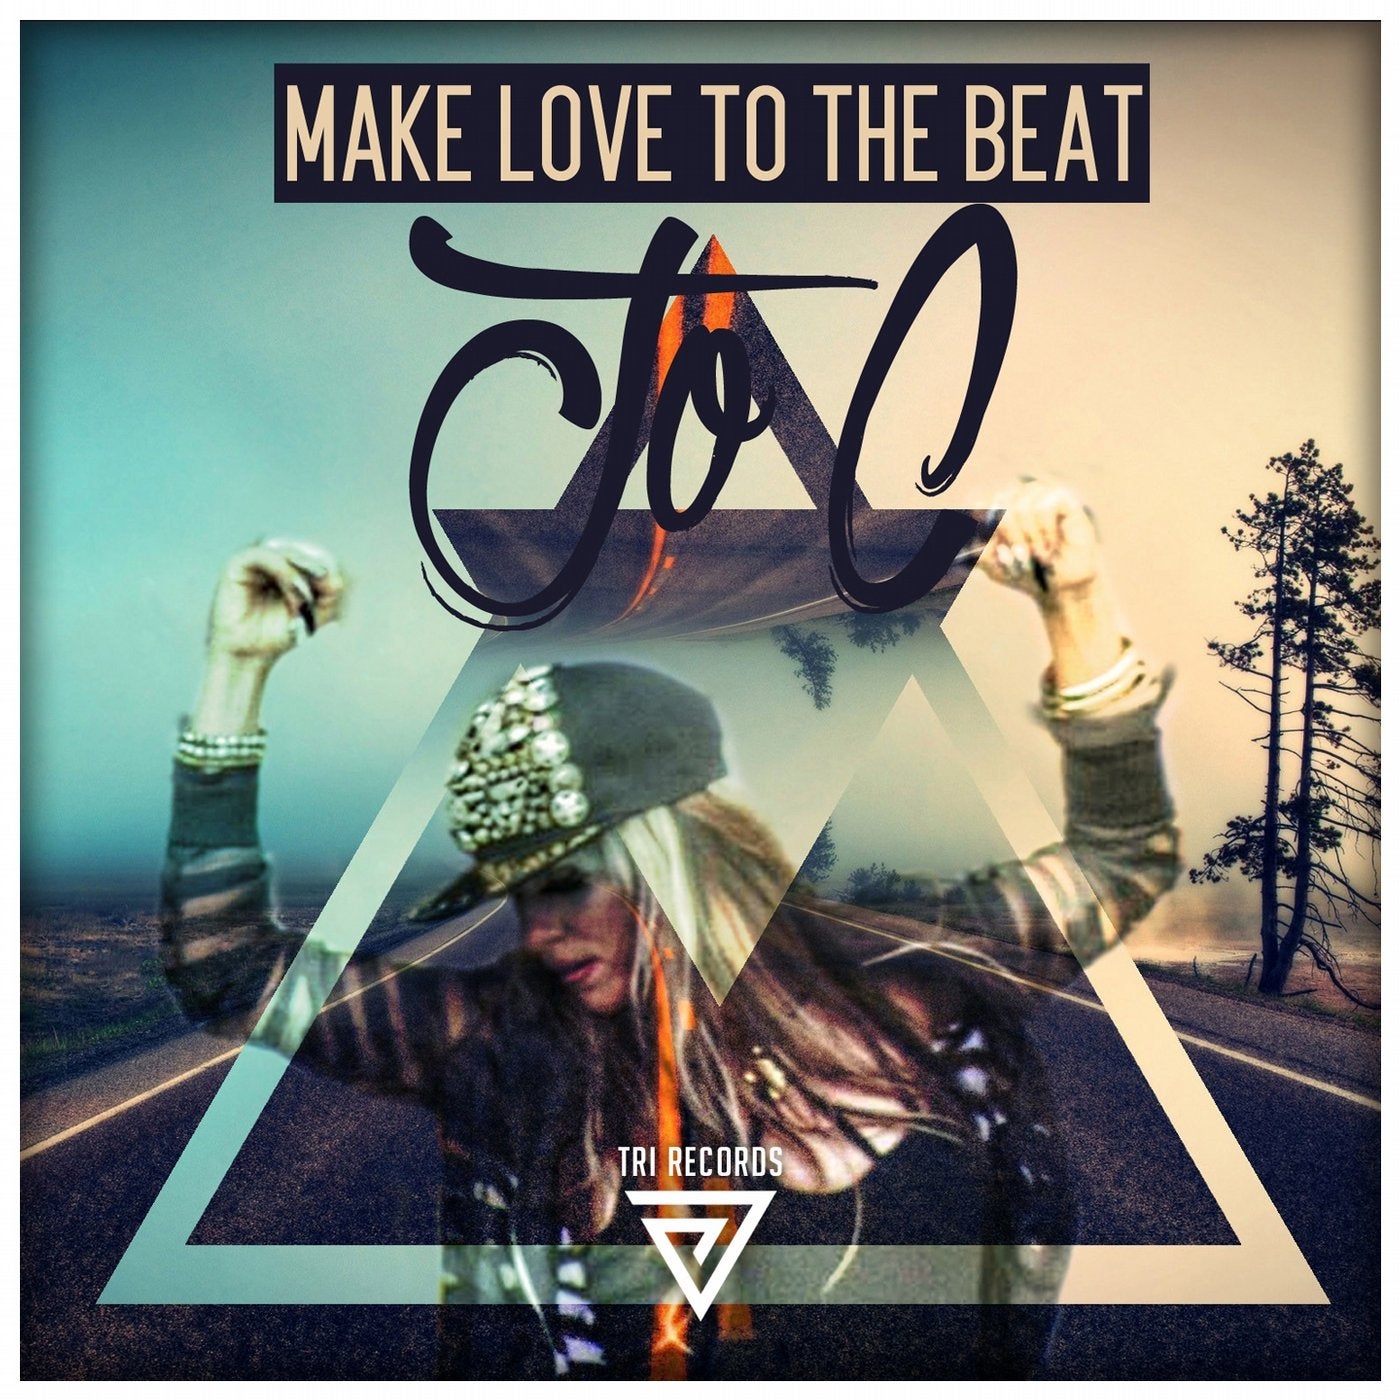 Make Love to the Beat